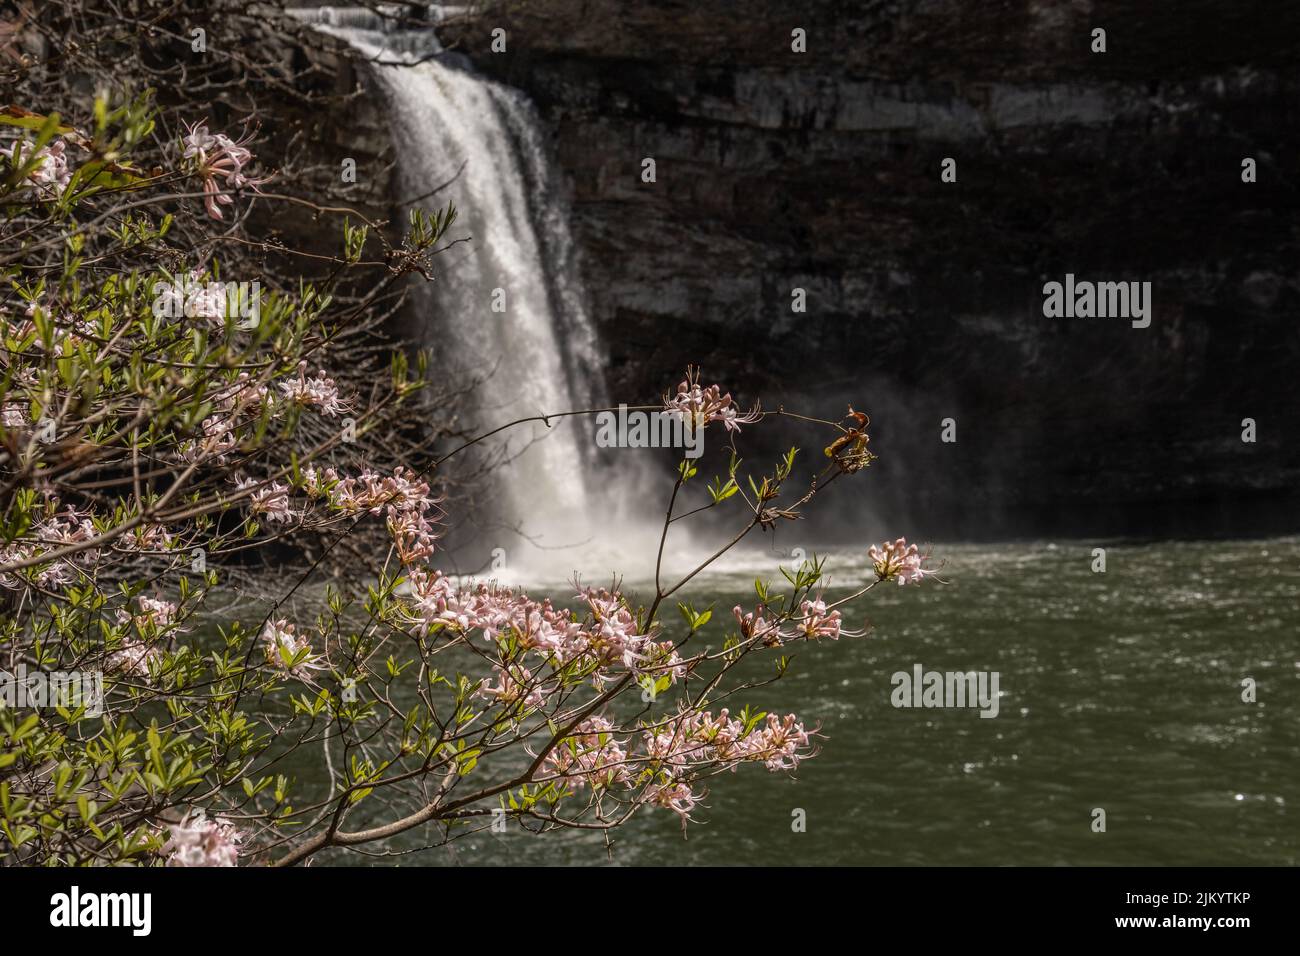 A scenic view of a waterfalls with beautiful flowers on the foreground Stock Photo